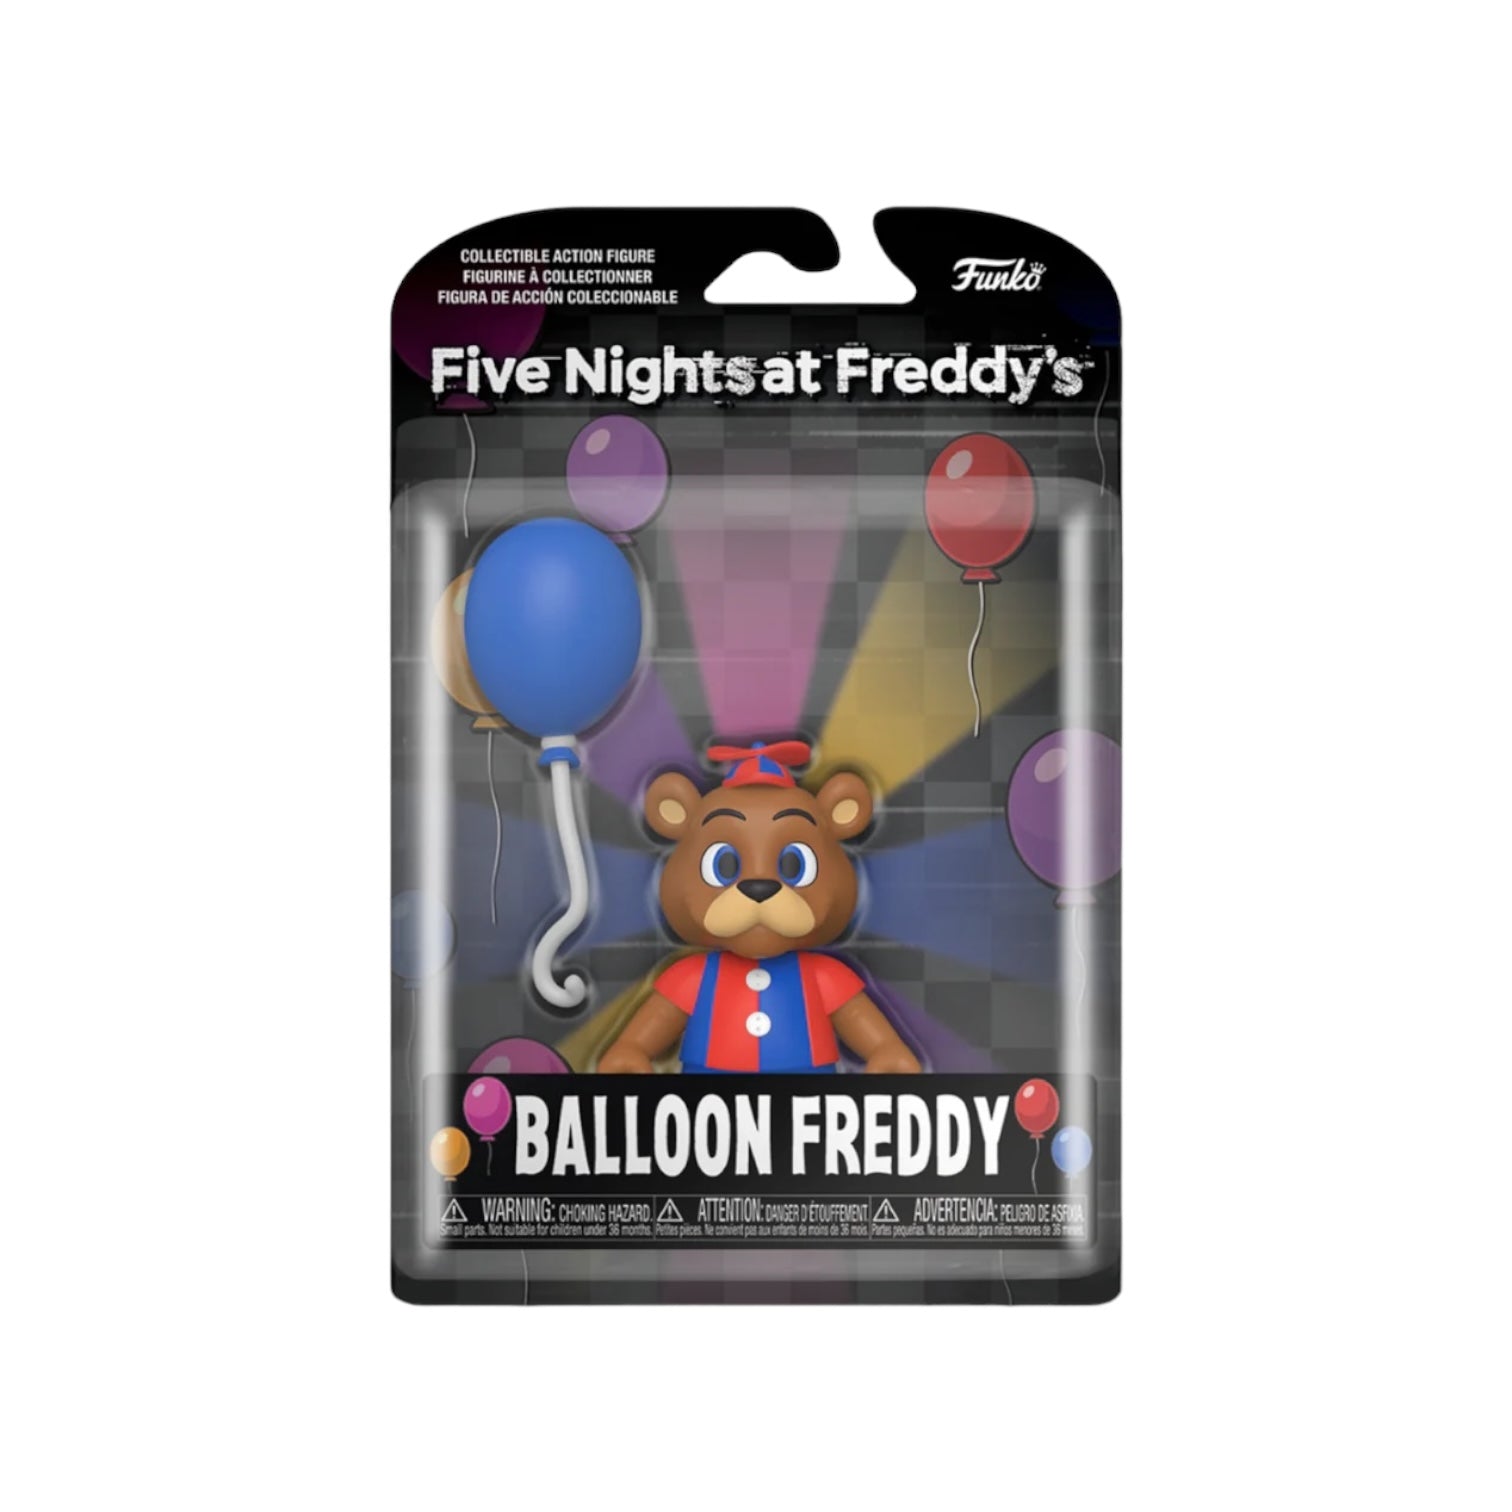 Balloon Freddy Funko Action Figure Five Nights at Freddy’s - Special Edition